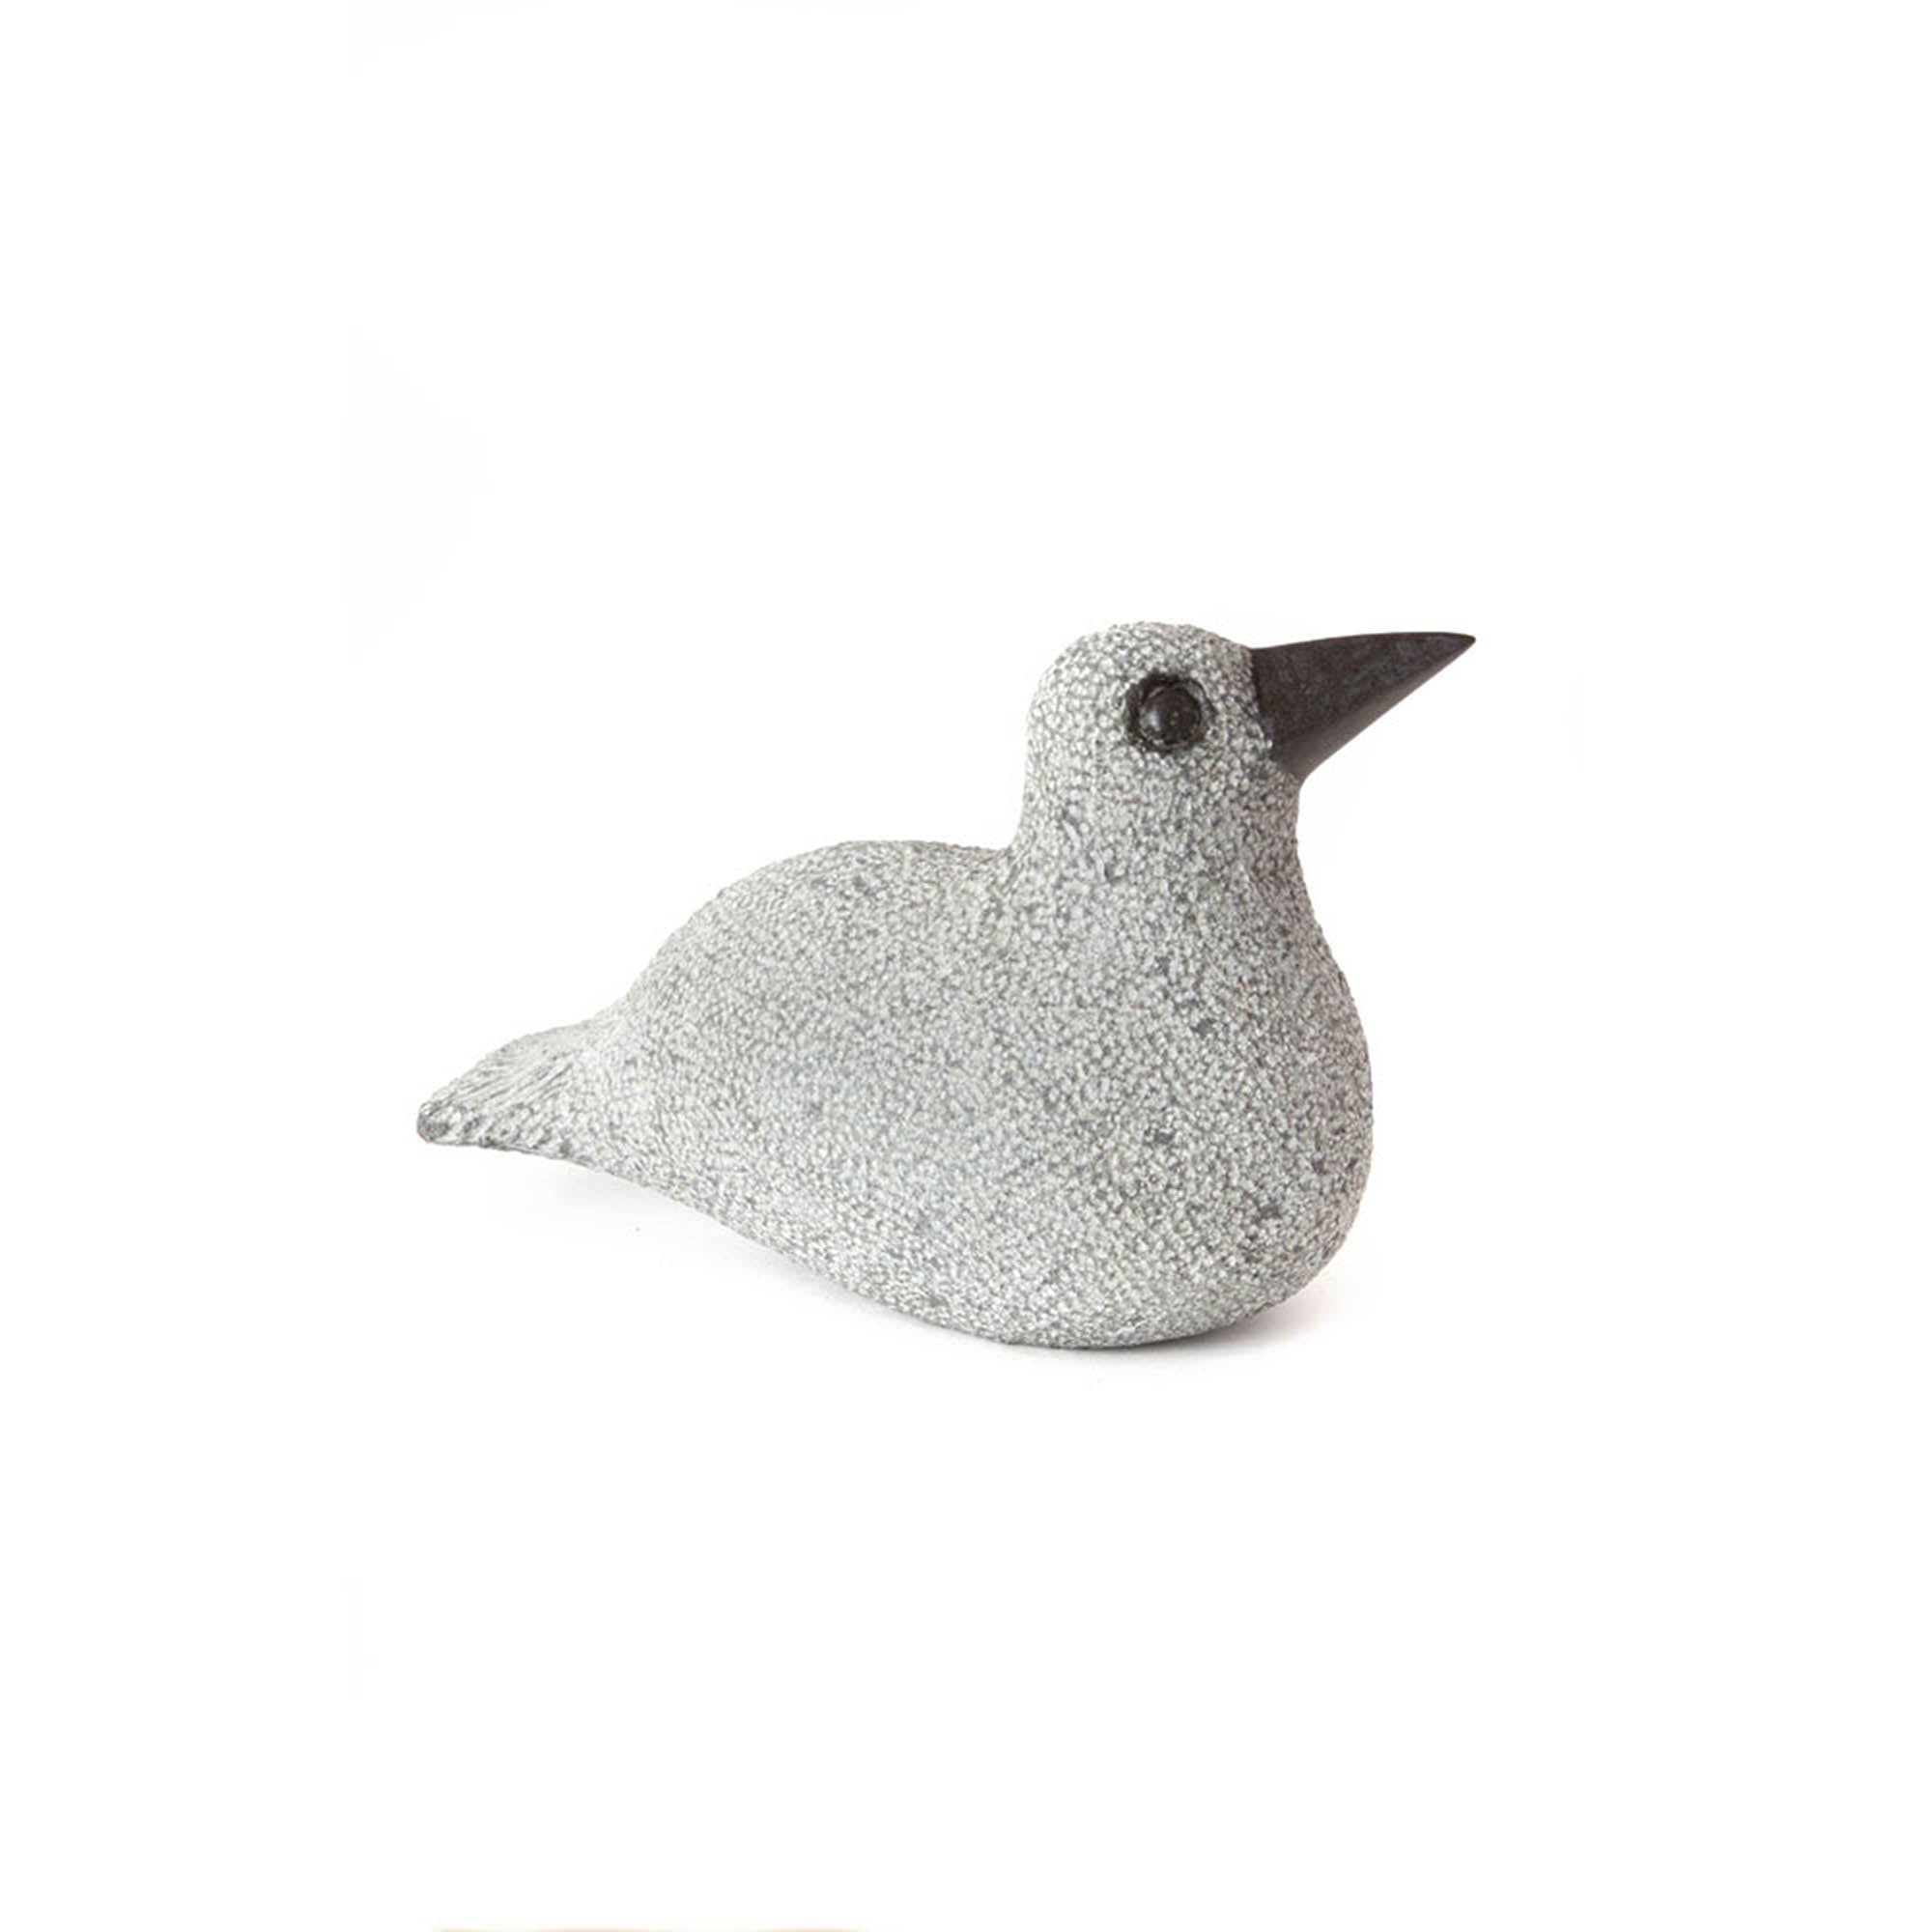 Hand-Carved Stone Duck Sculpture - M